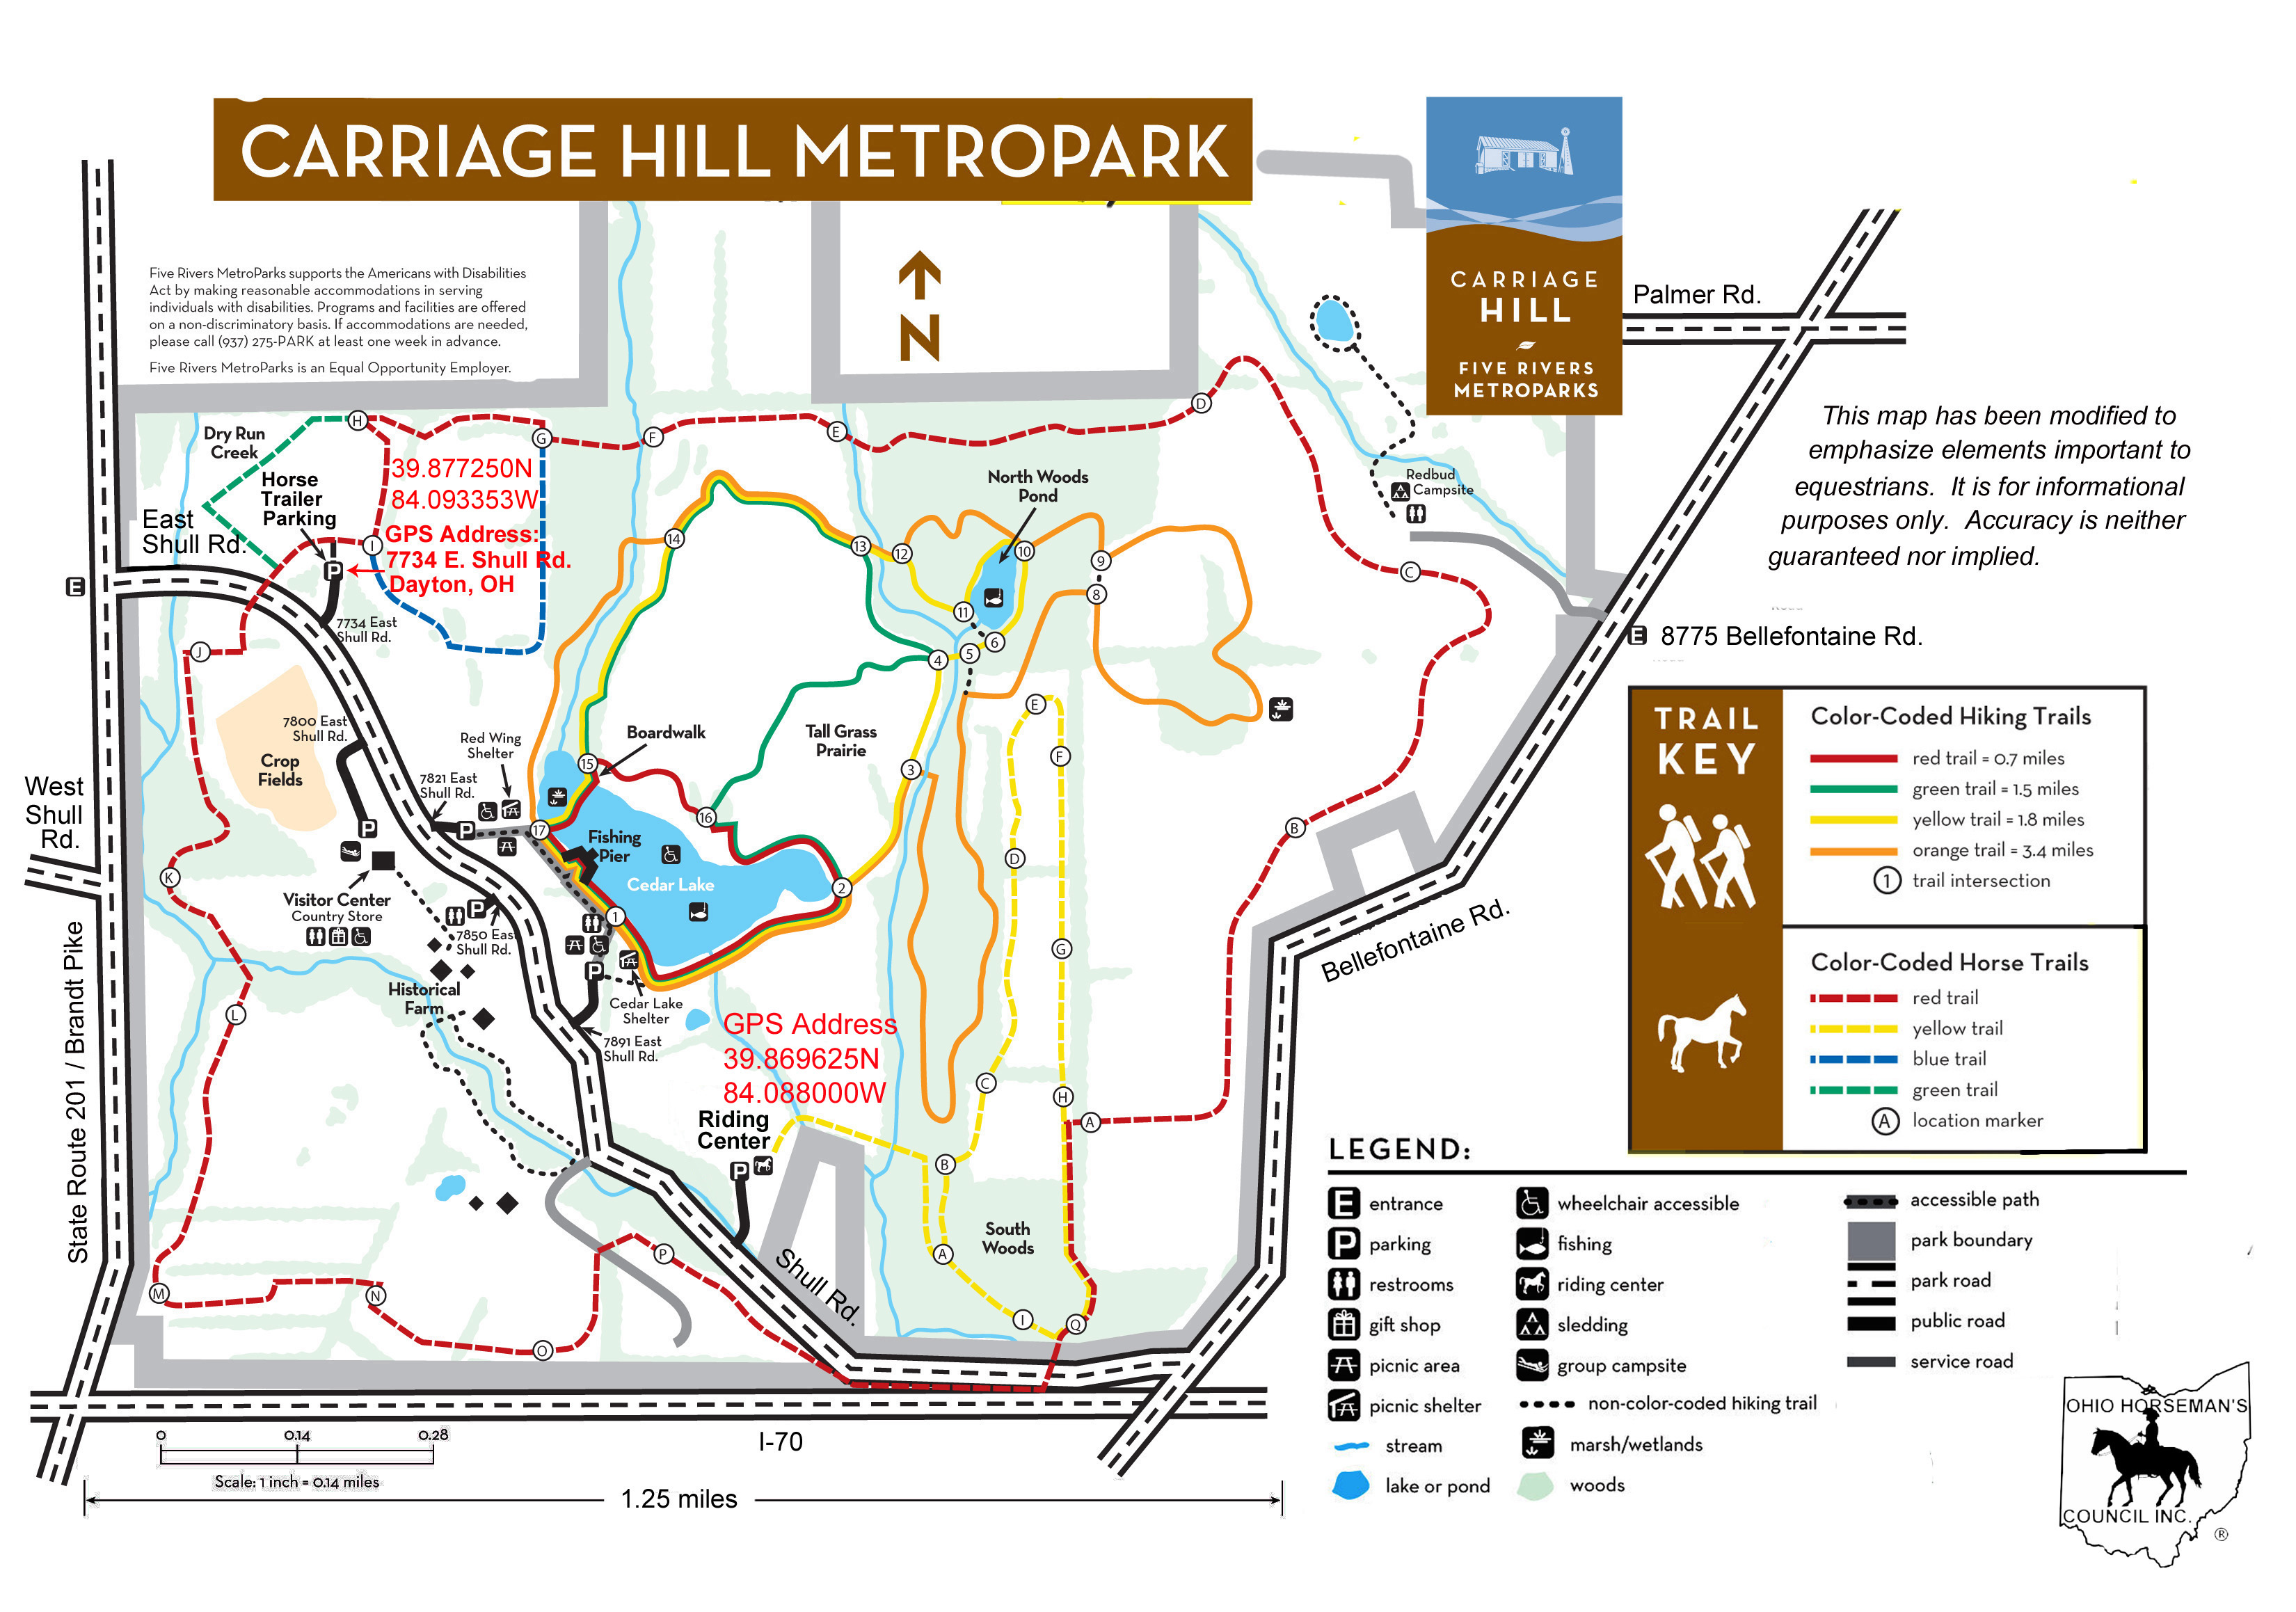 Carriage Hill Metro Park